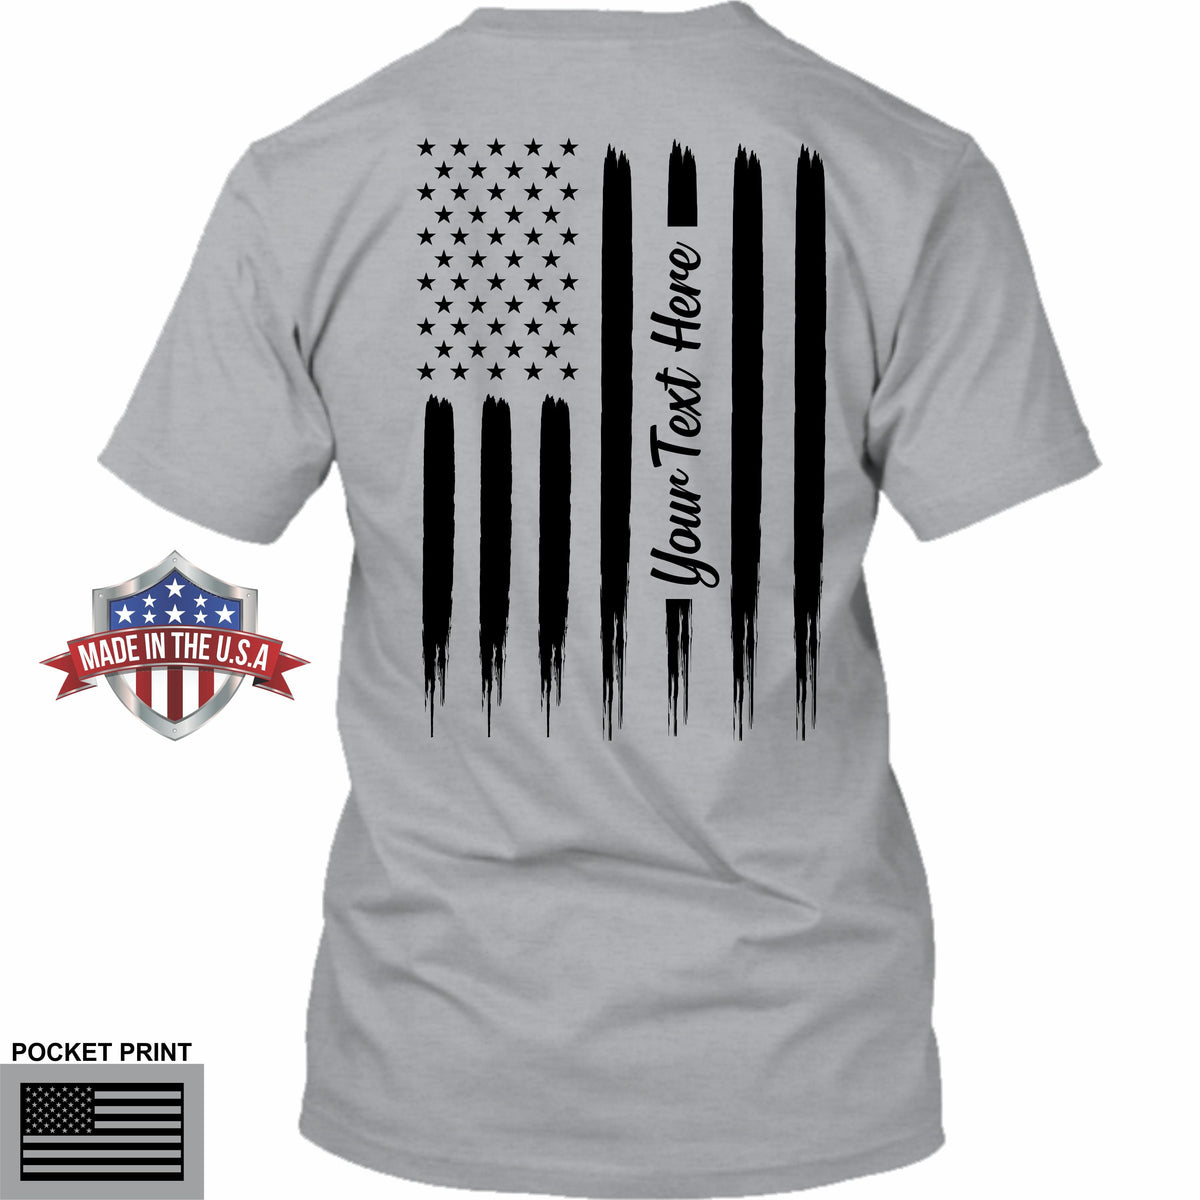 Tall Size - Tattered American Flag - Your Text Here